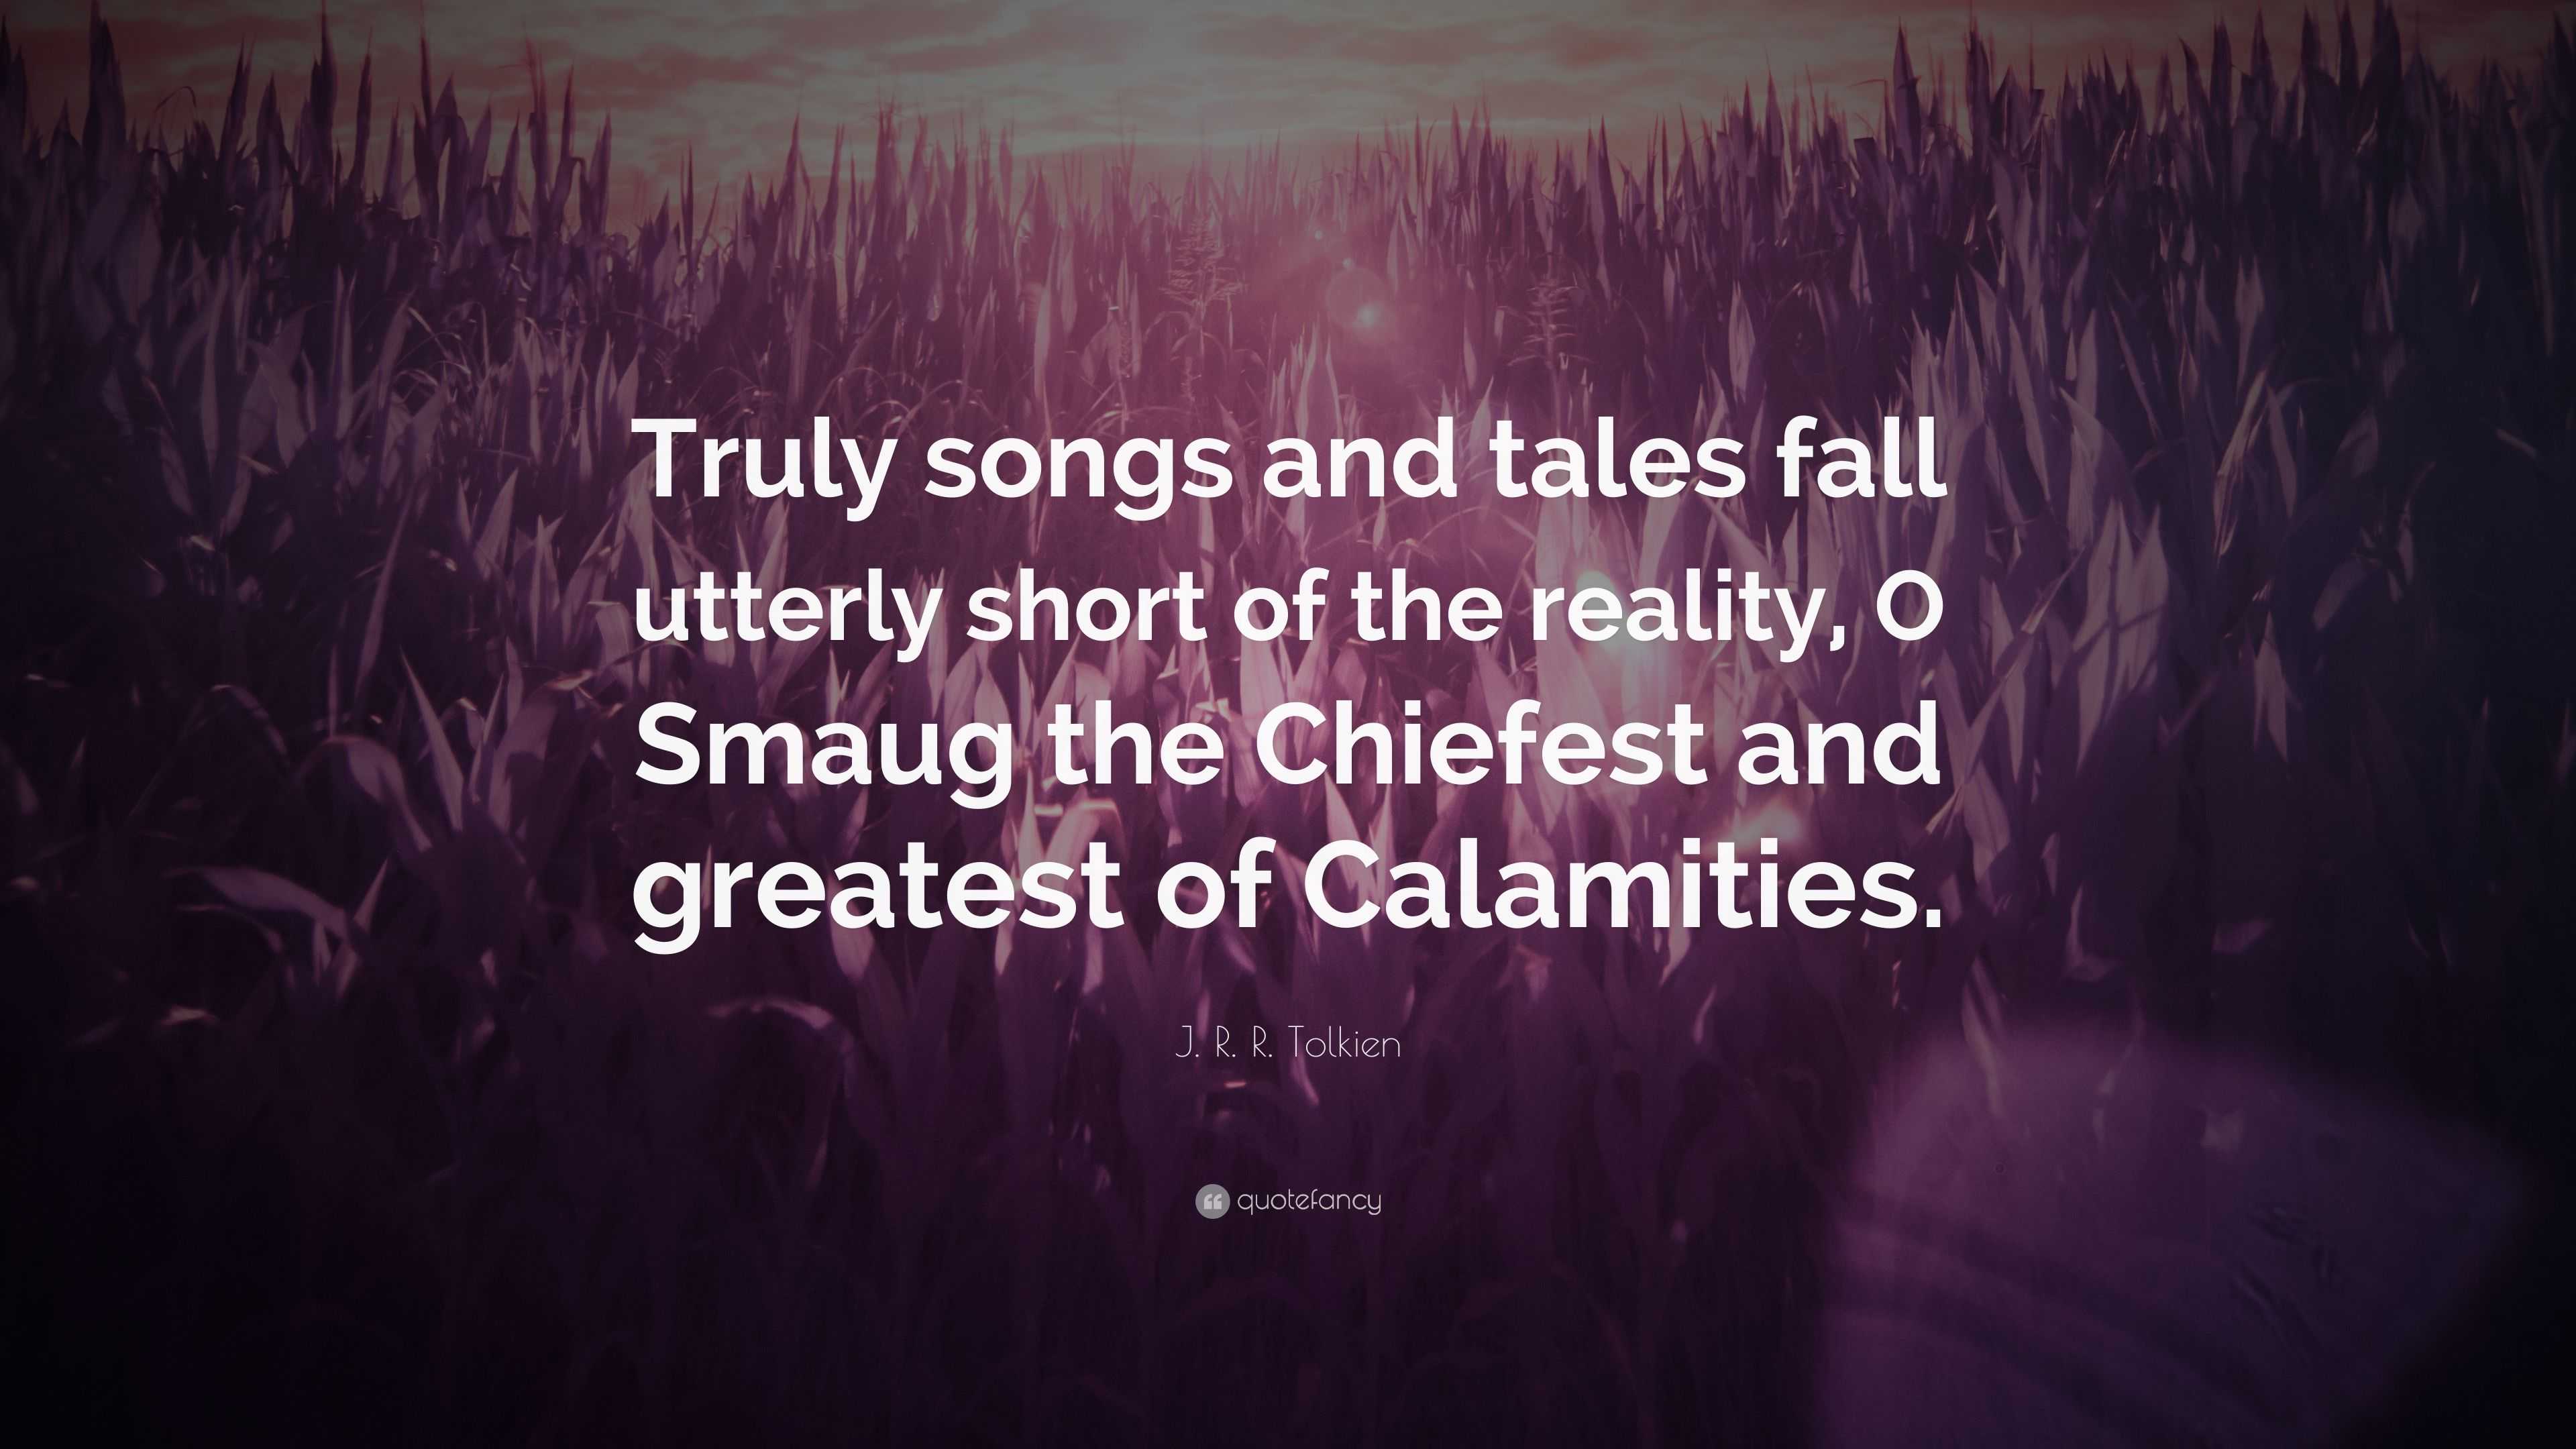 chiefest and greatest of calamities